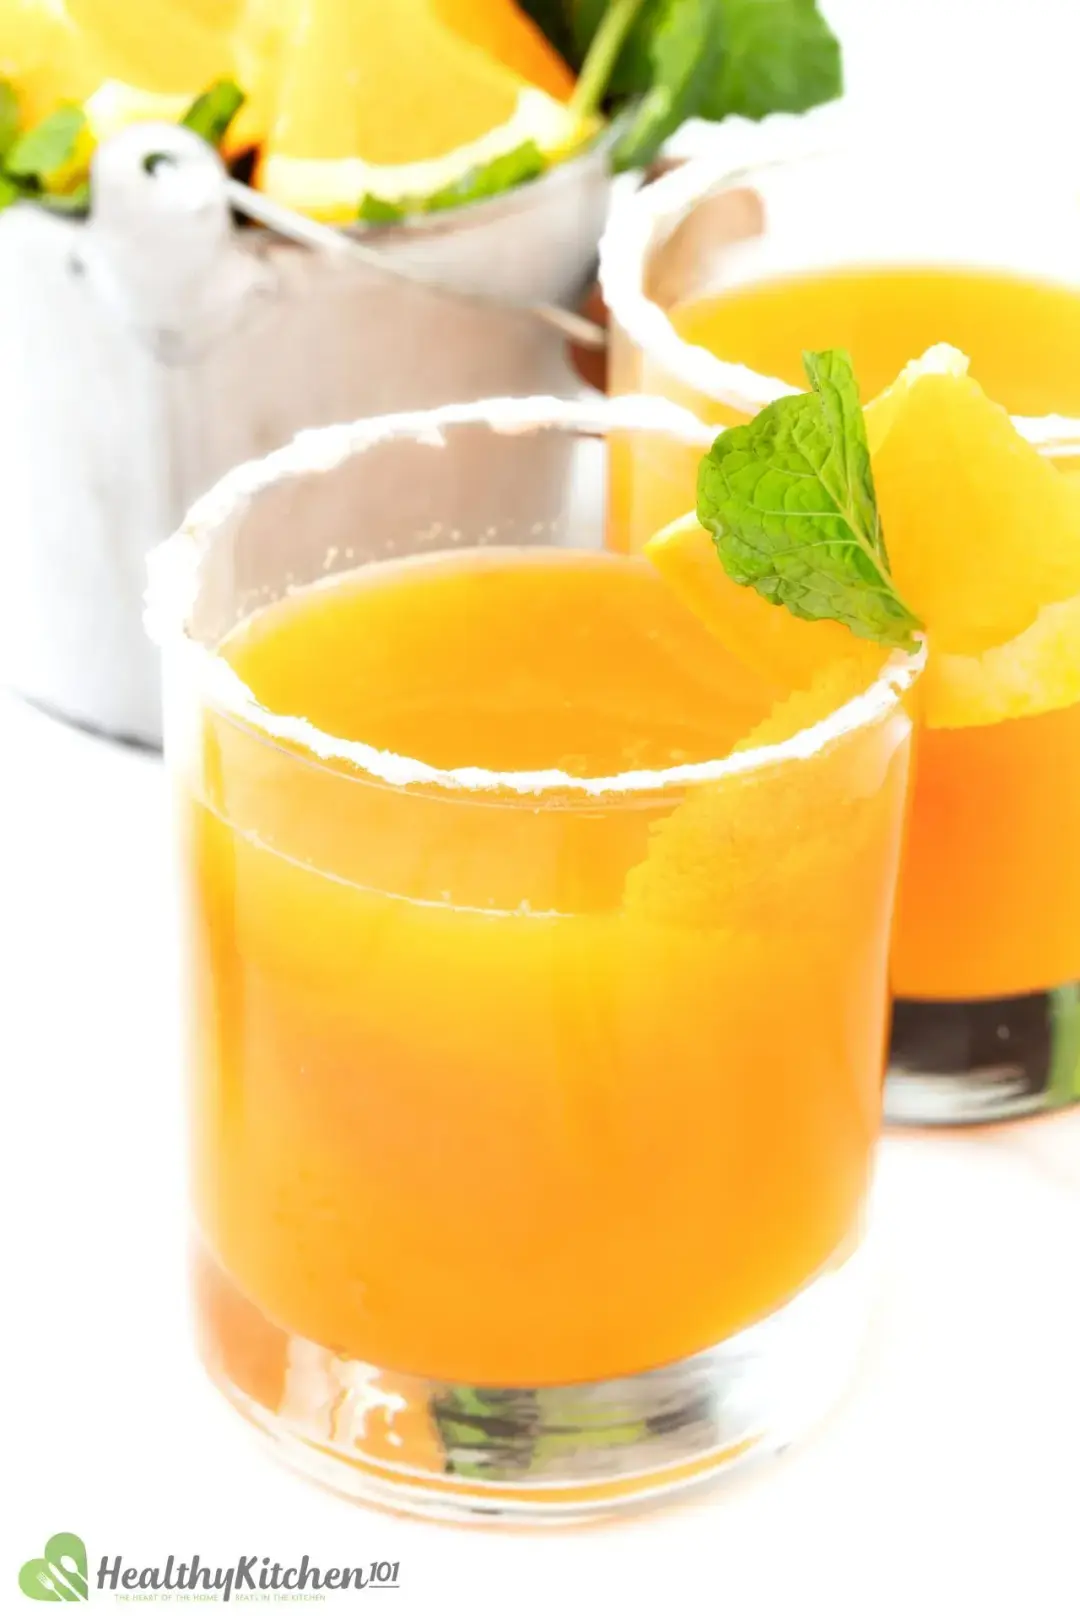 Two glasses of orange juice cocktail placed side by side, with powdered sugar on the rim and mint sprigs